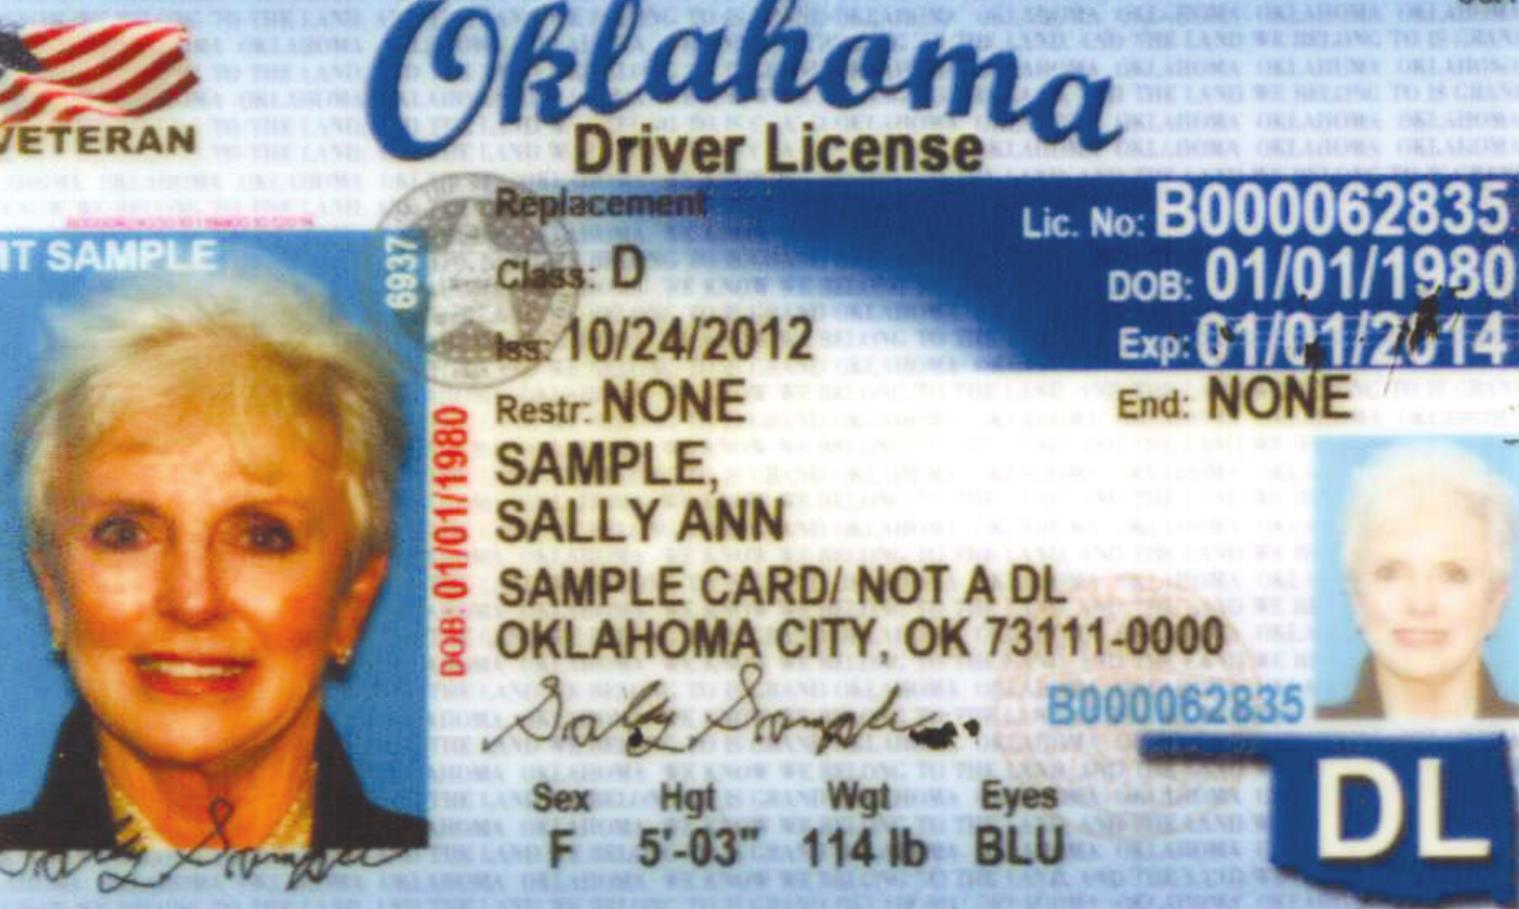 Extension id. Oklahoma Driver License. Орегон штат Driver License. Driver License ID.